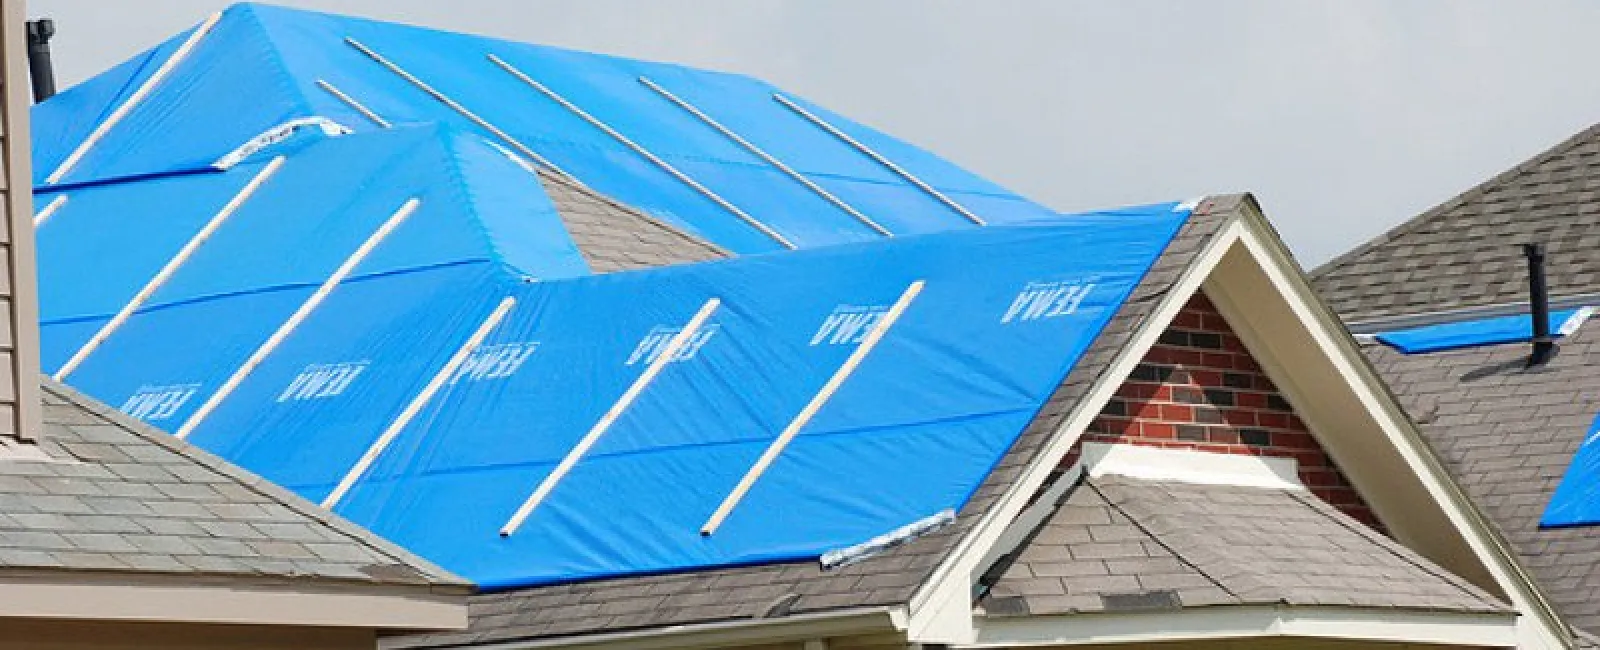 Is your roofing insurance policy confusing? Here are some must ask questions.